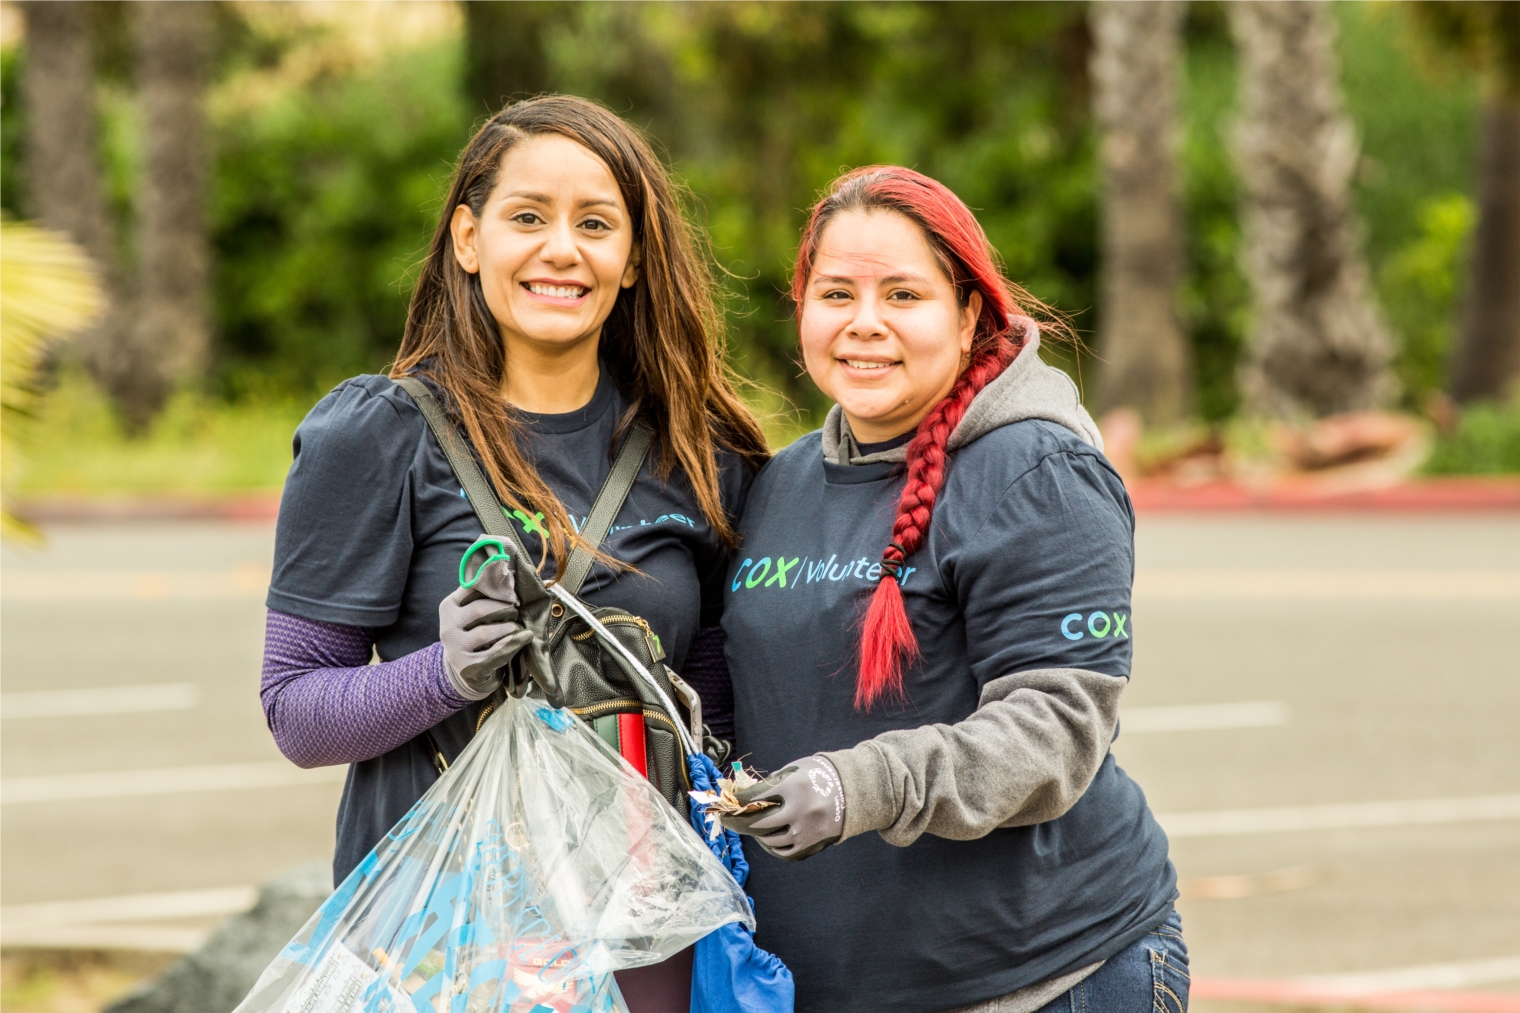 Our employees can participate in more than 800 environmental projects, from holding a virtual meeting instead of traveling to purchasing a vehicle with improved fuel economy. To date, Cox employees have completed more than 200,000 individual actions.